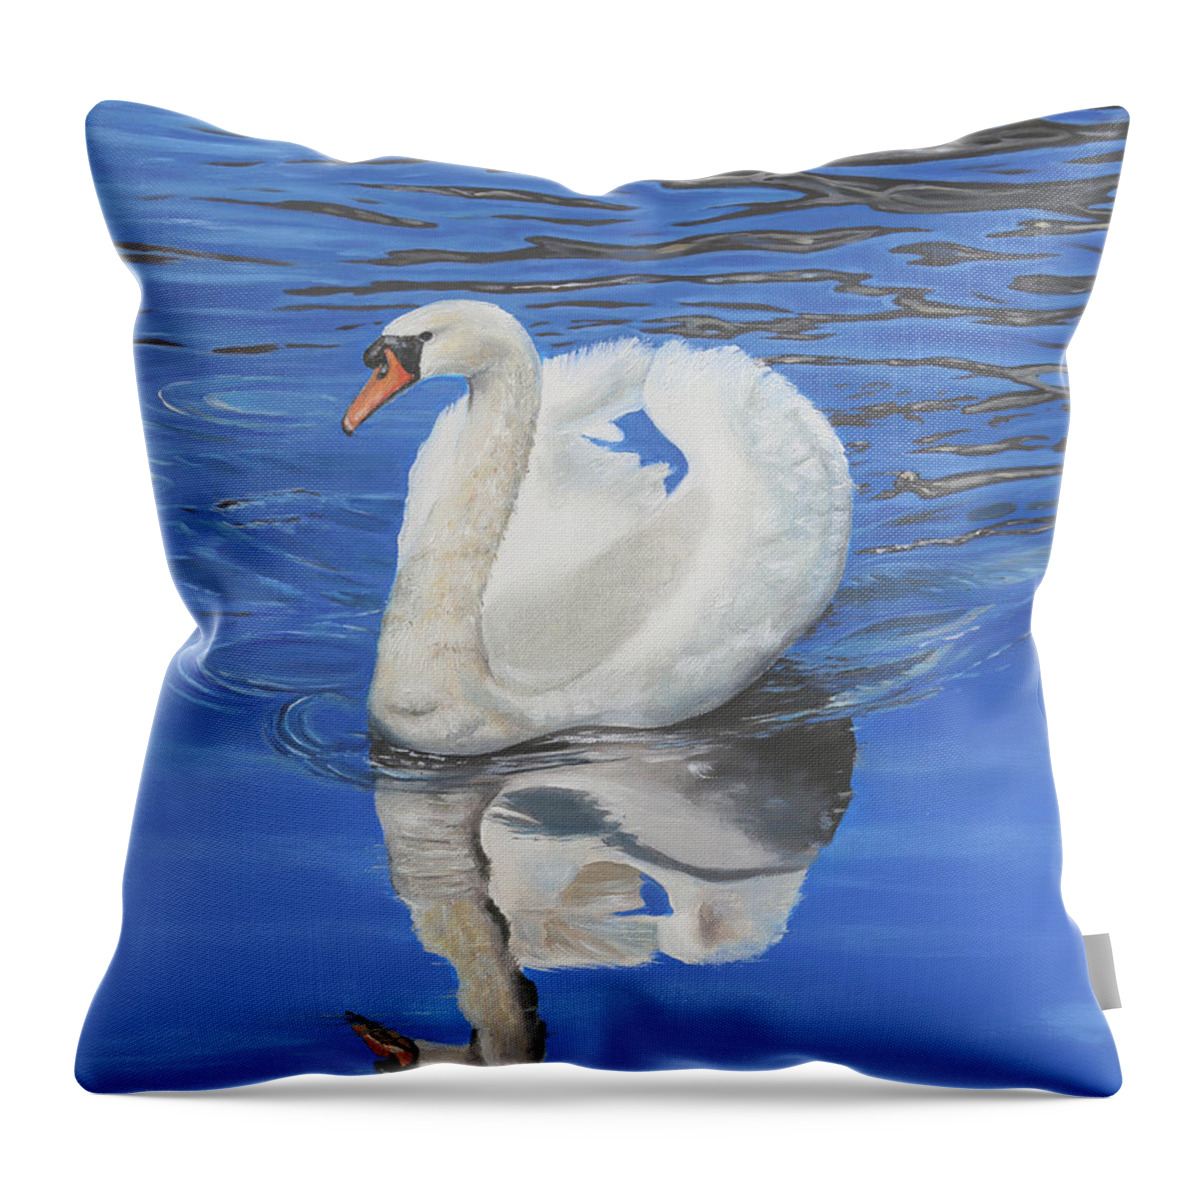 White Birds Throw Pillow featuring the painting Swan Reflection by Elizabeth Lock